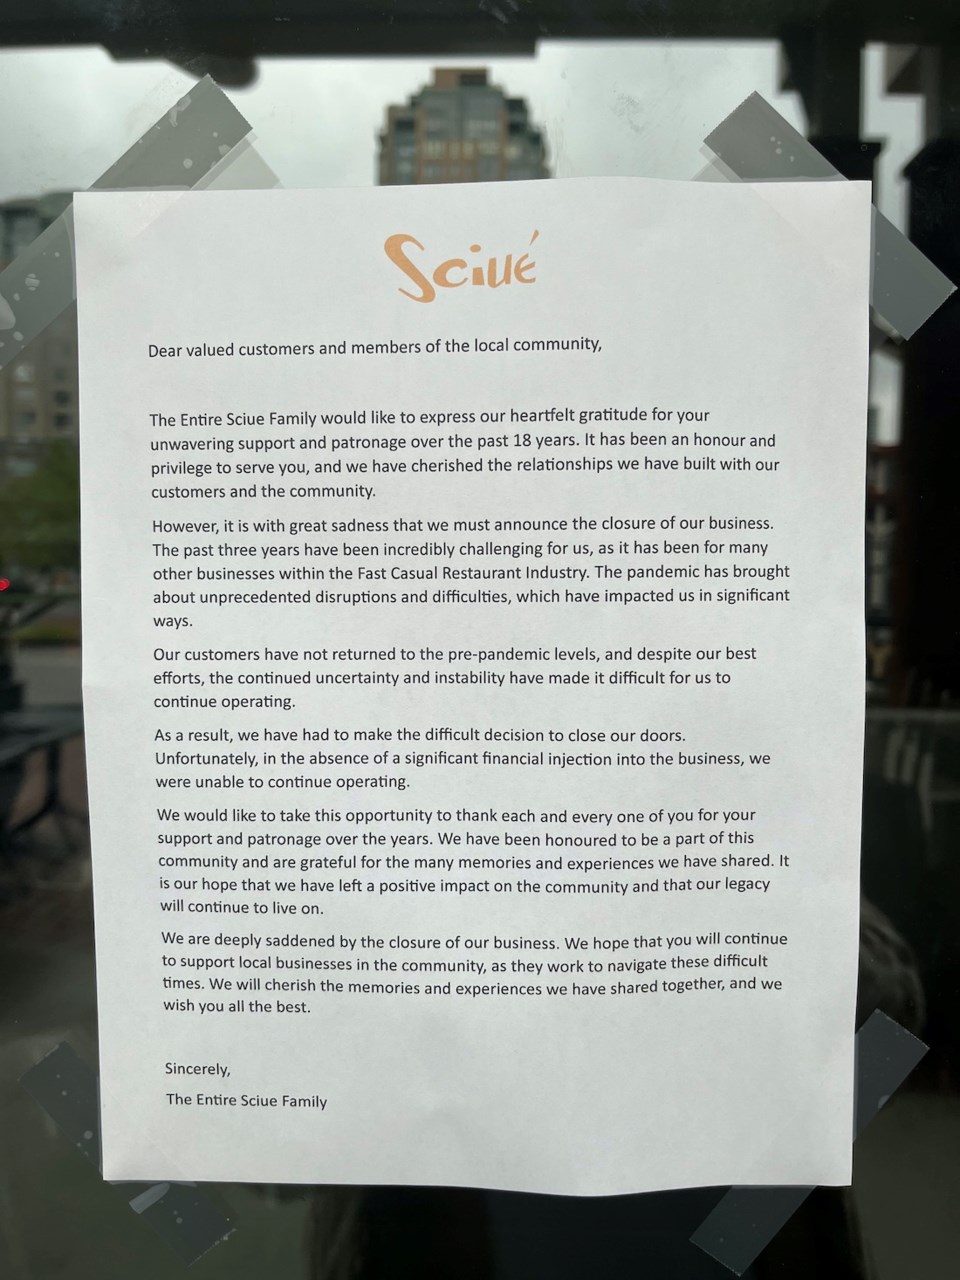 sciue-letter-yaletown-location